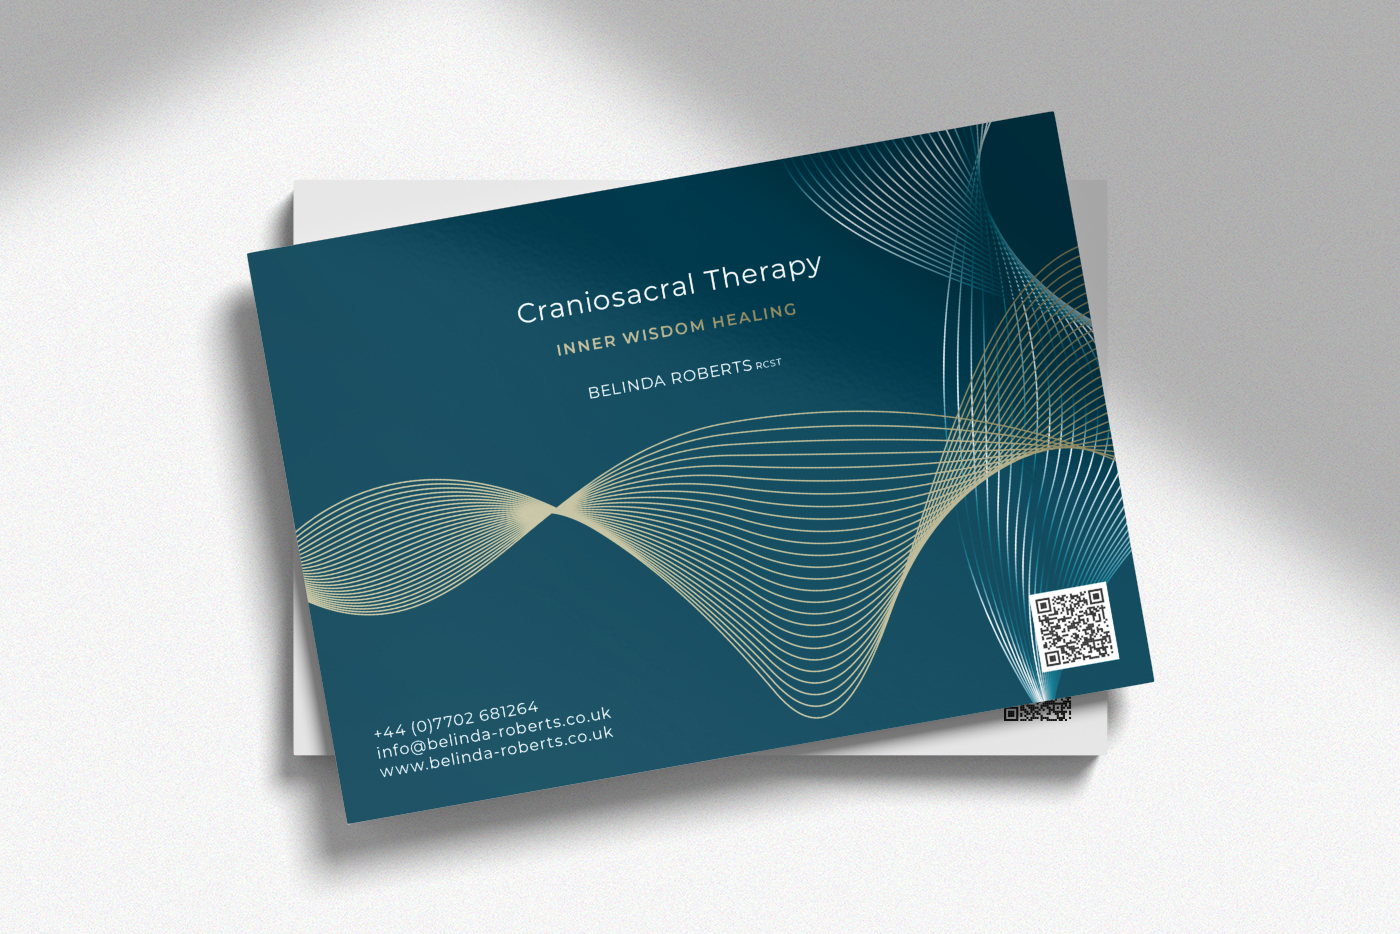 Postcard design featuring alternative therapy identity design for Belinda Roberts – designed by Paul Cartwright Branding.